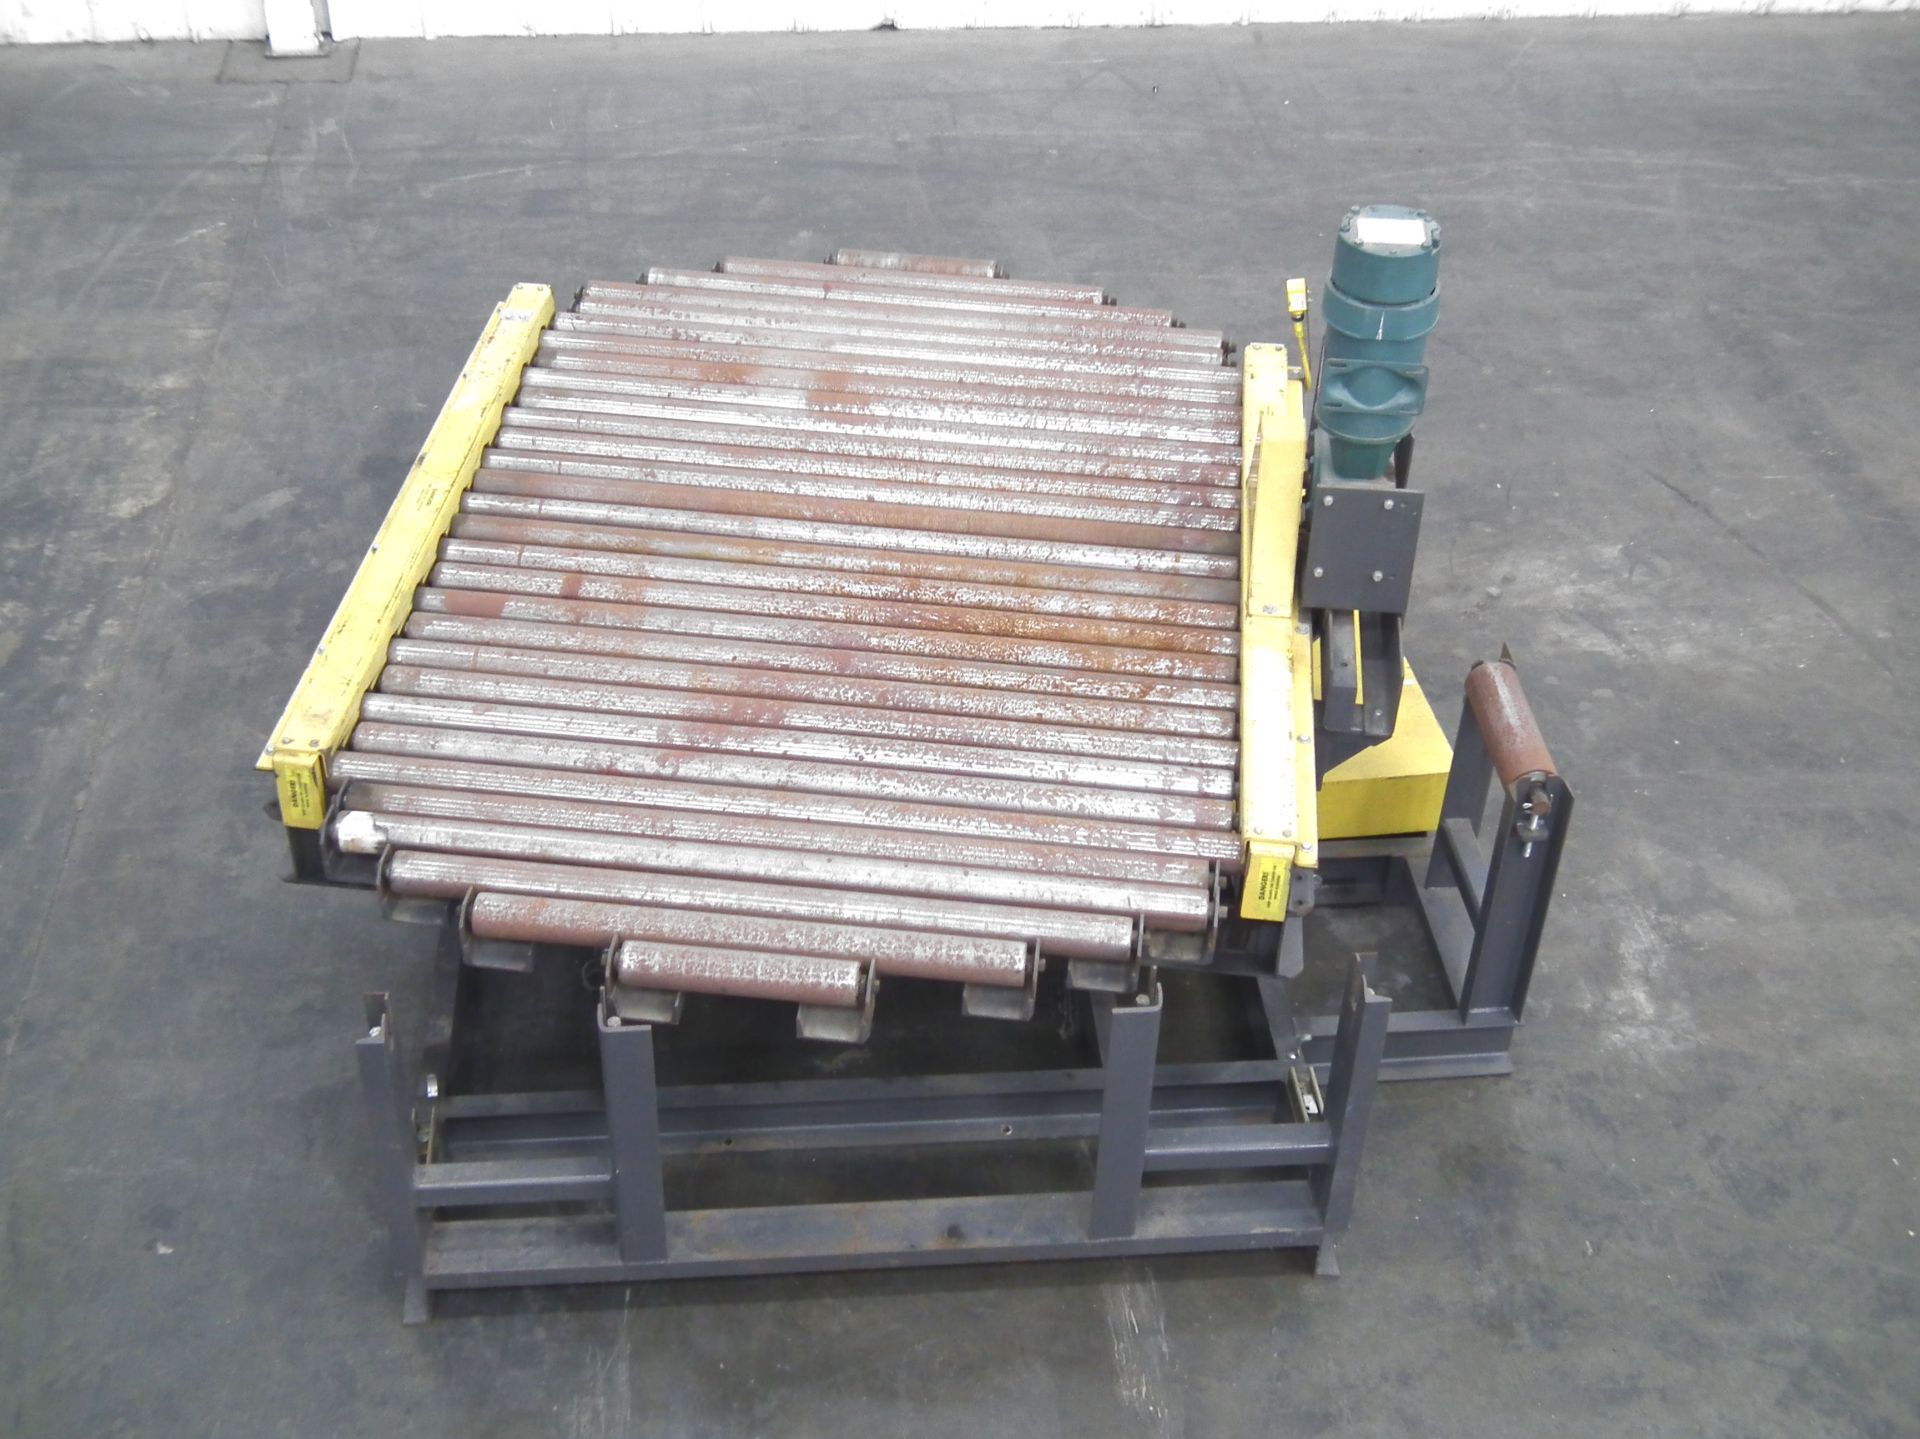 Hytrol Turntable for Full Pallets 90 Degree Motion A9776 - Image 5 of 8